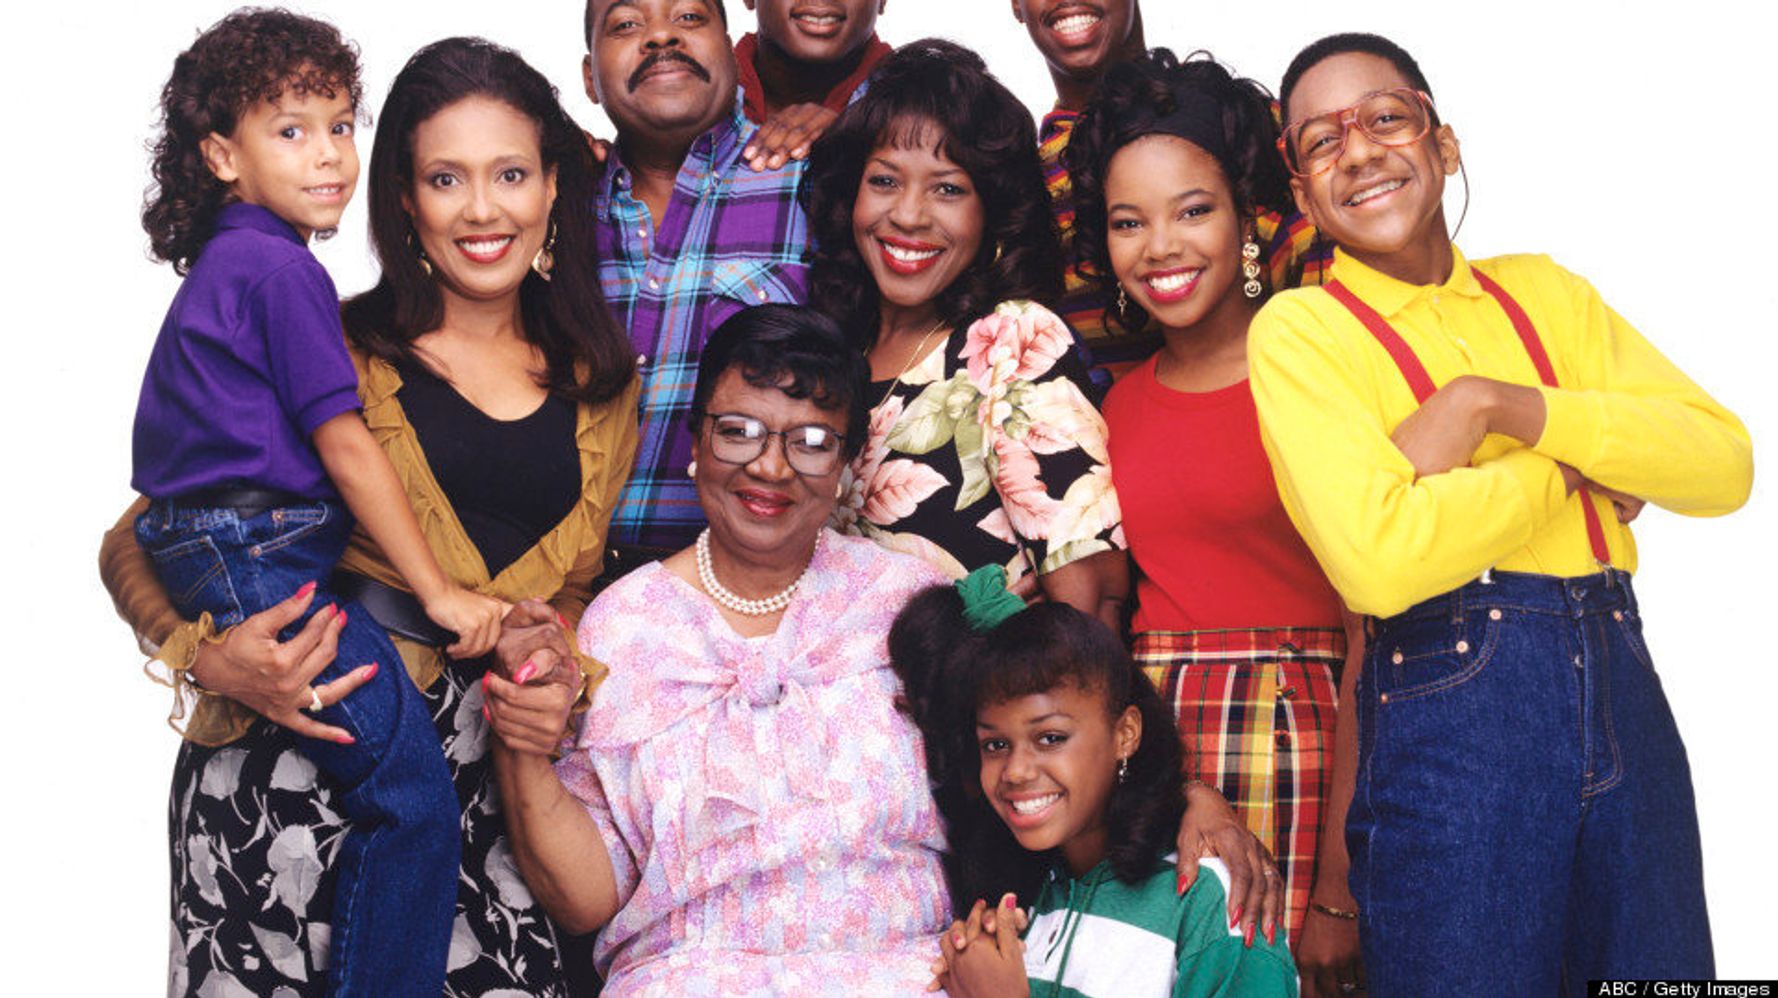 Naughtia Childs Porn - 'Family Matters' Star Jaimee Foxworth On Why She Turned To Porn